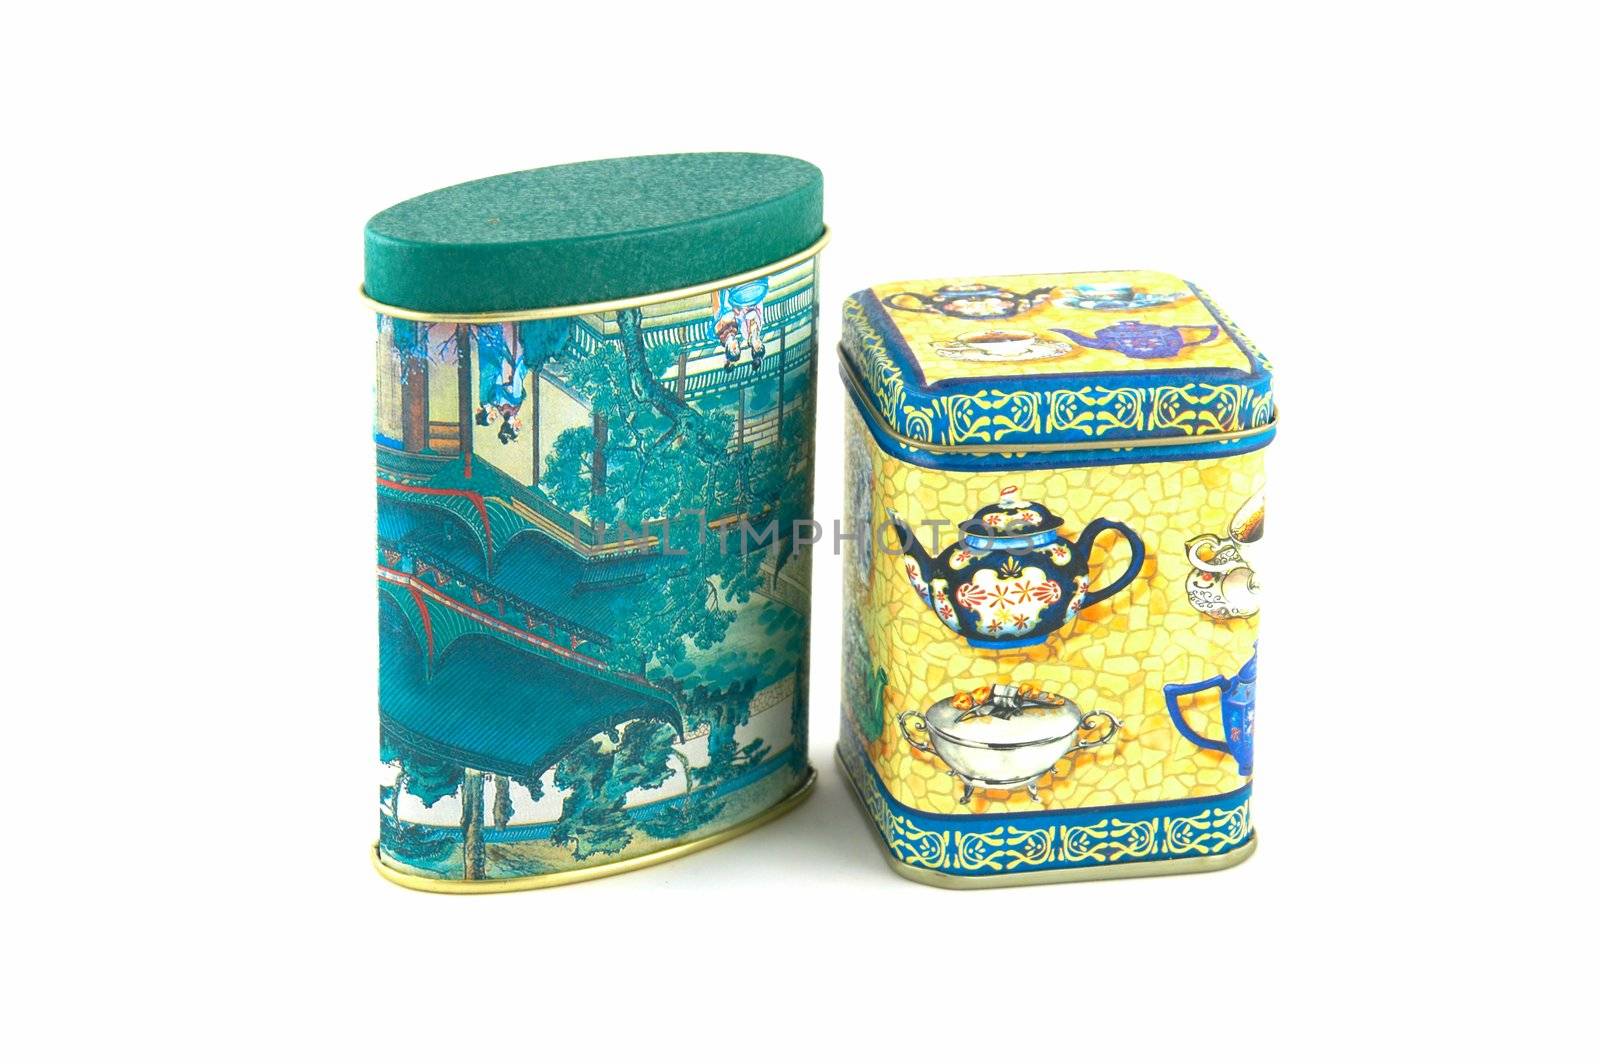 Painted tin box for storage of tea